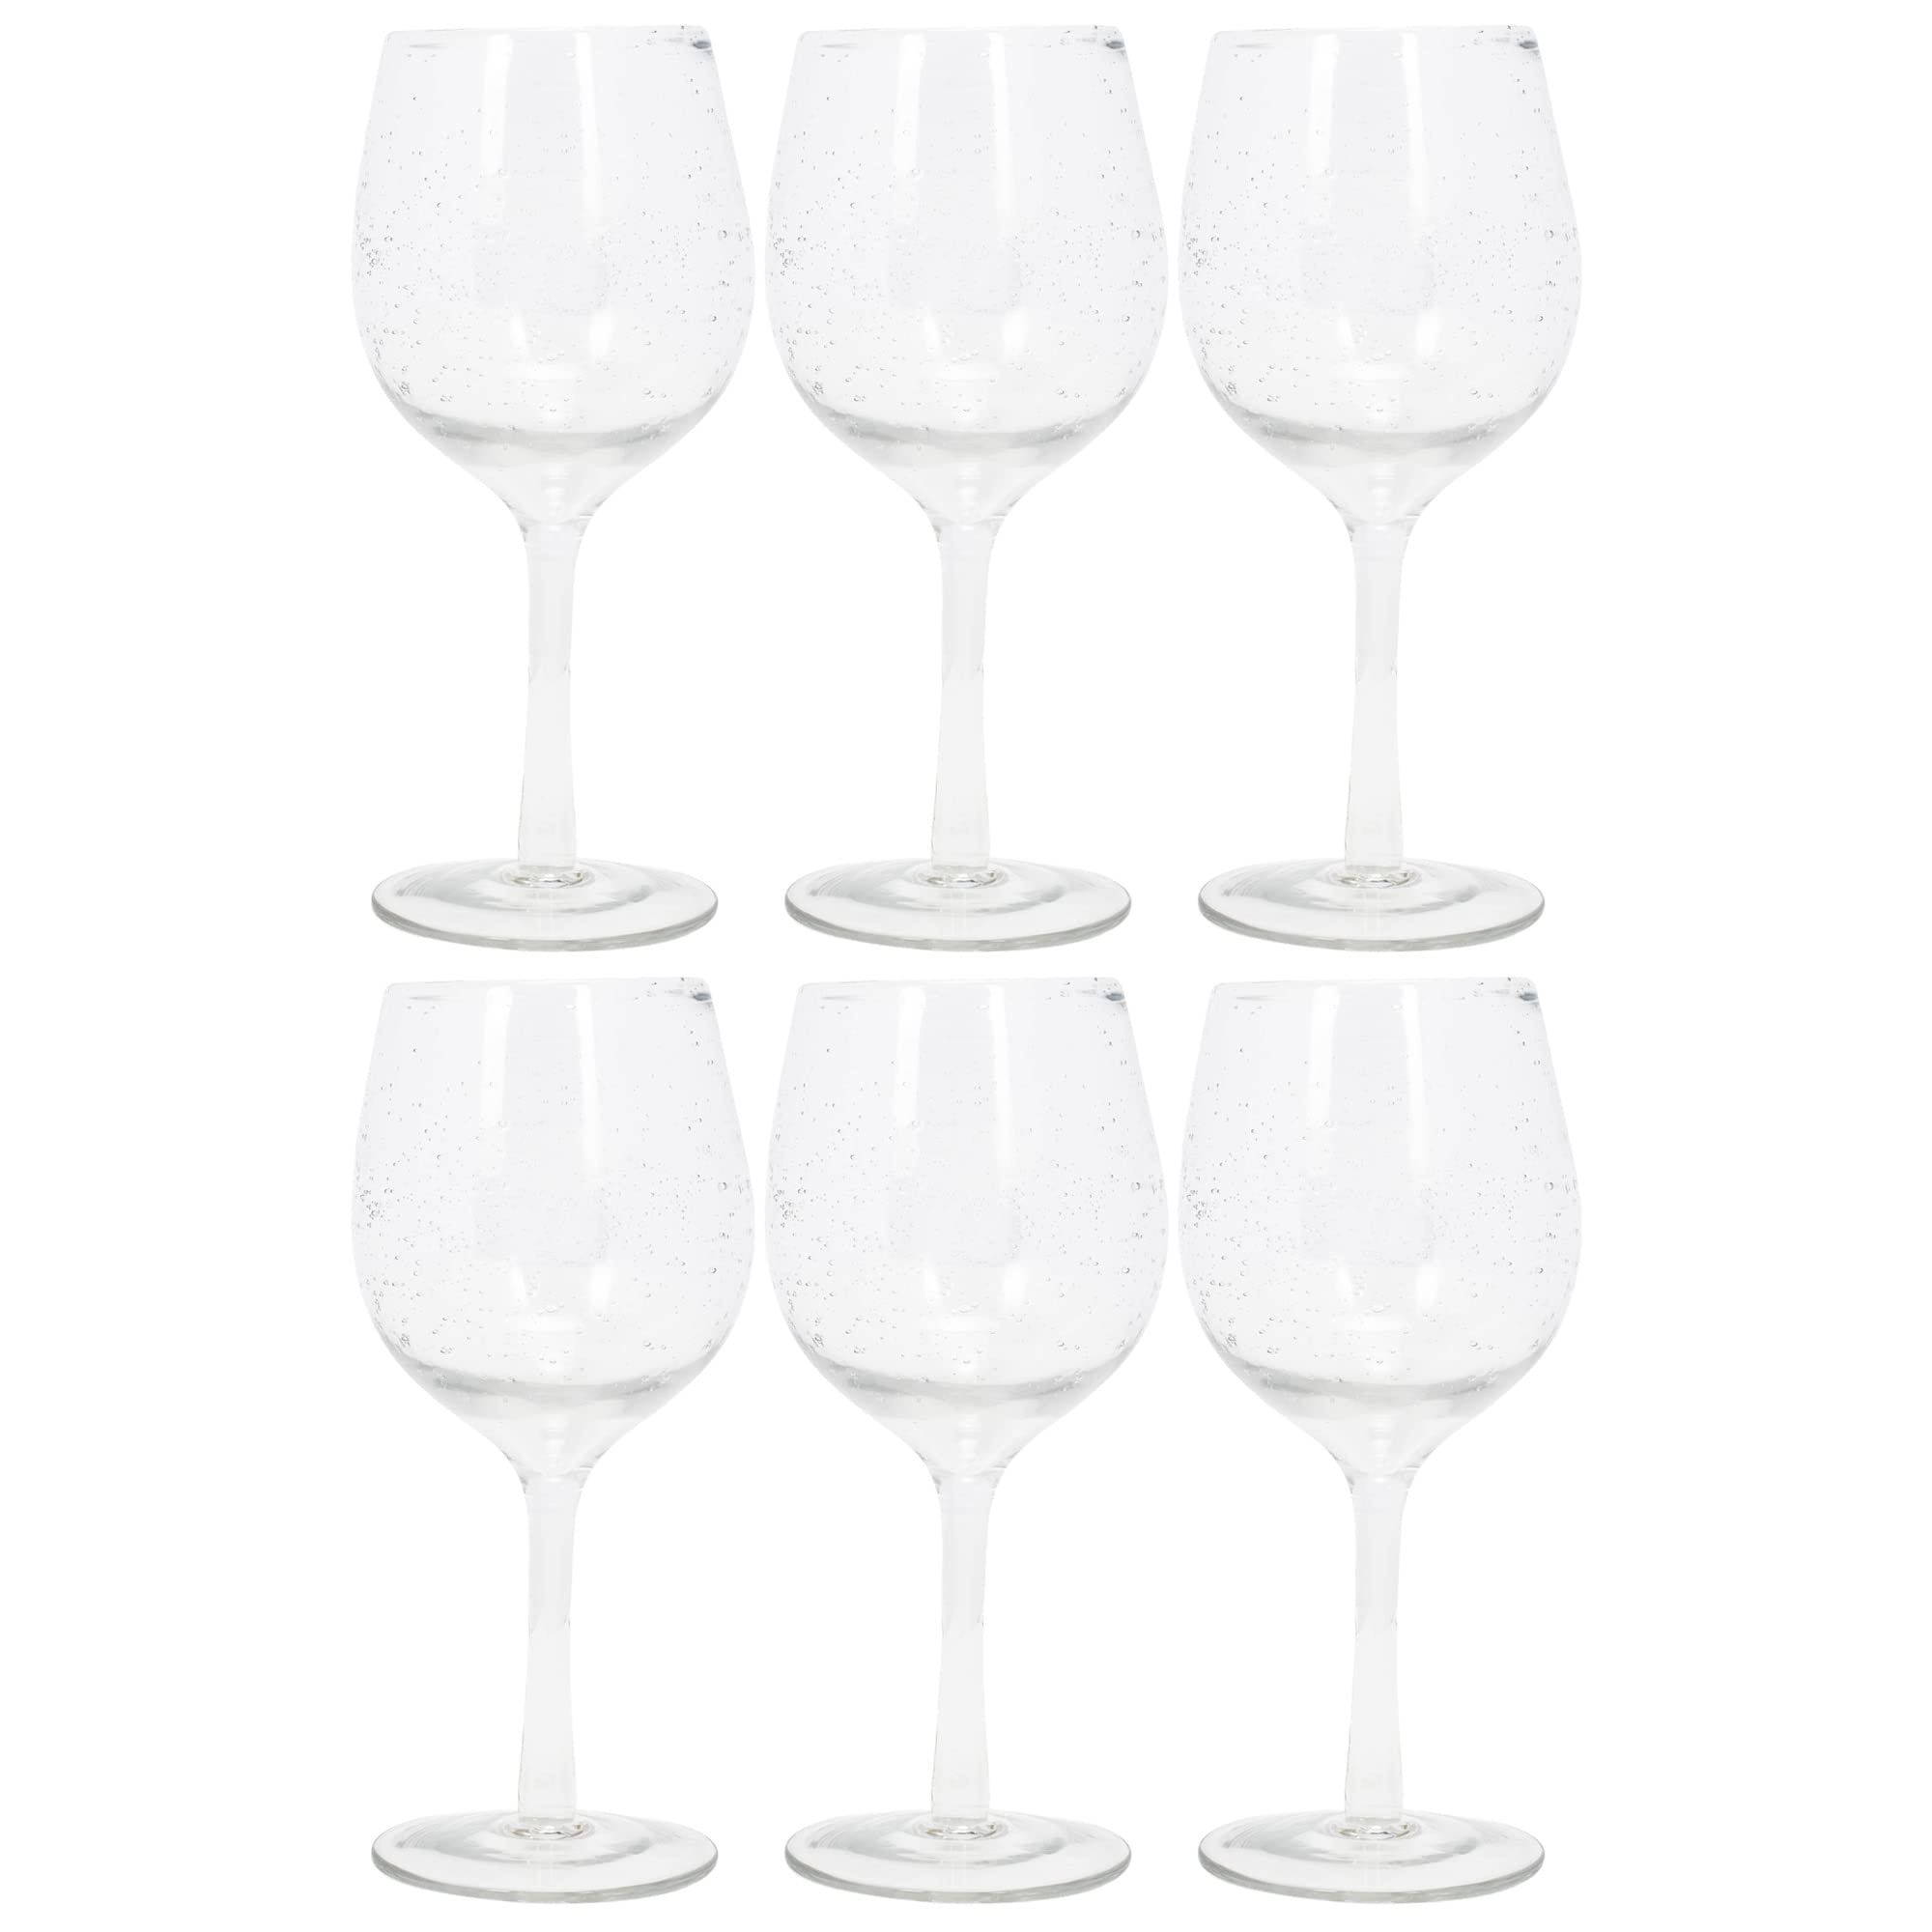 TAG True Living Perfectly Clear Bubble 15 ounce Tall Stemmed Glass Set of 6, Wine